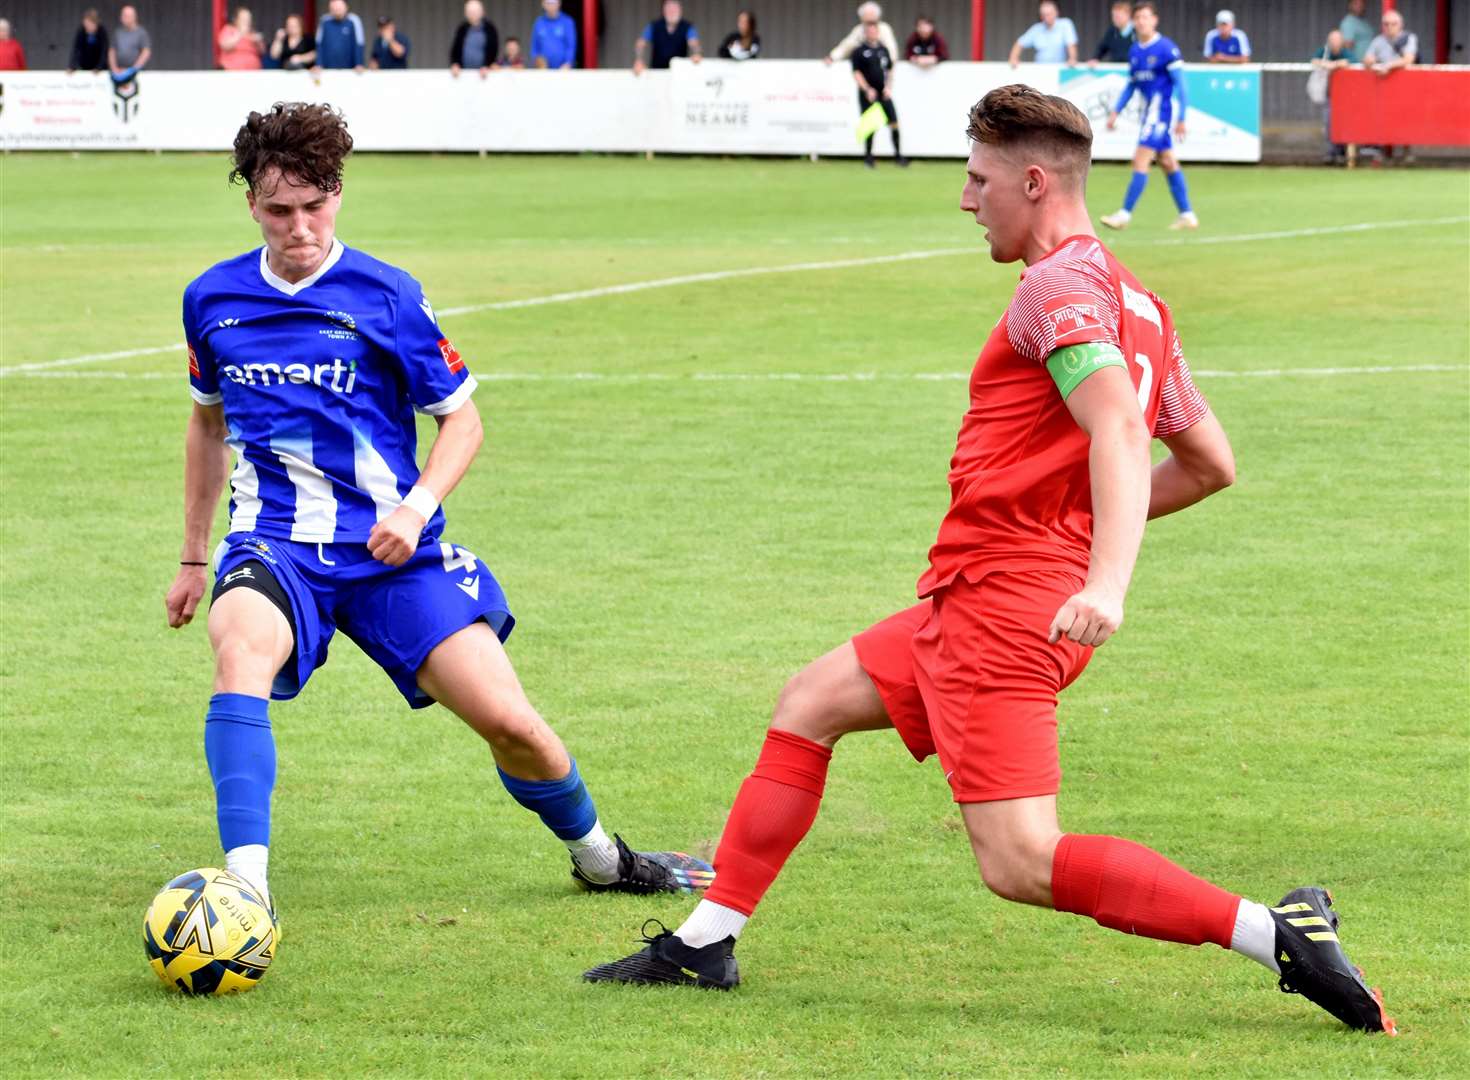 Hythe Town captain Liam Smith was among the scorers against East Grinstead. Picture: Randolph File